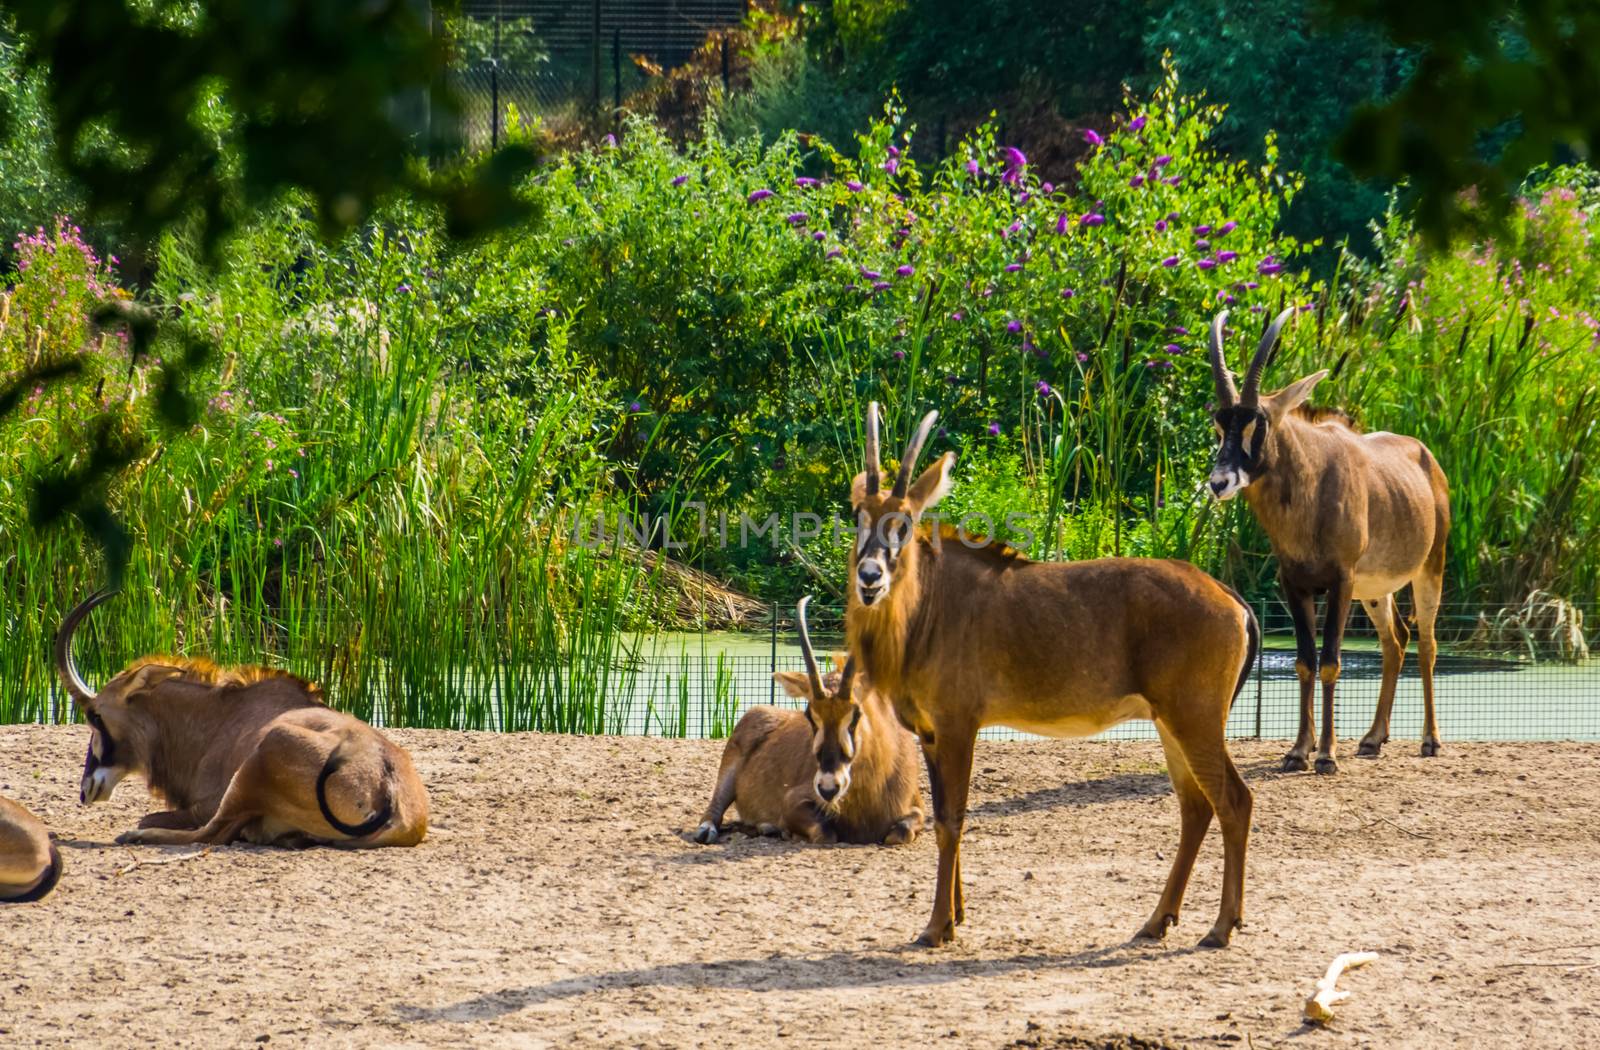 roan antelope herd together, tropical animal specie from the savanna of africa